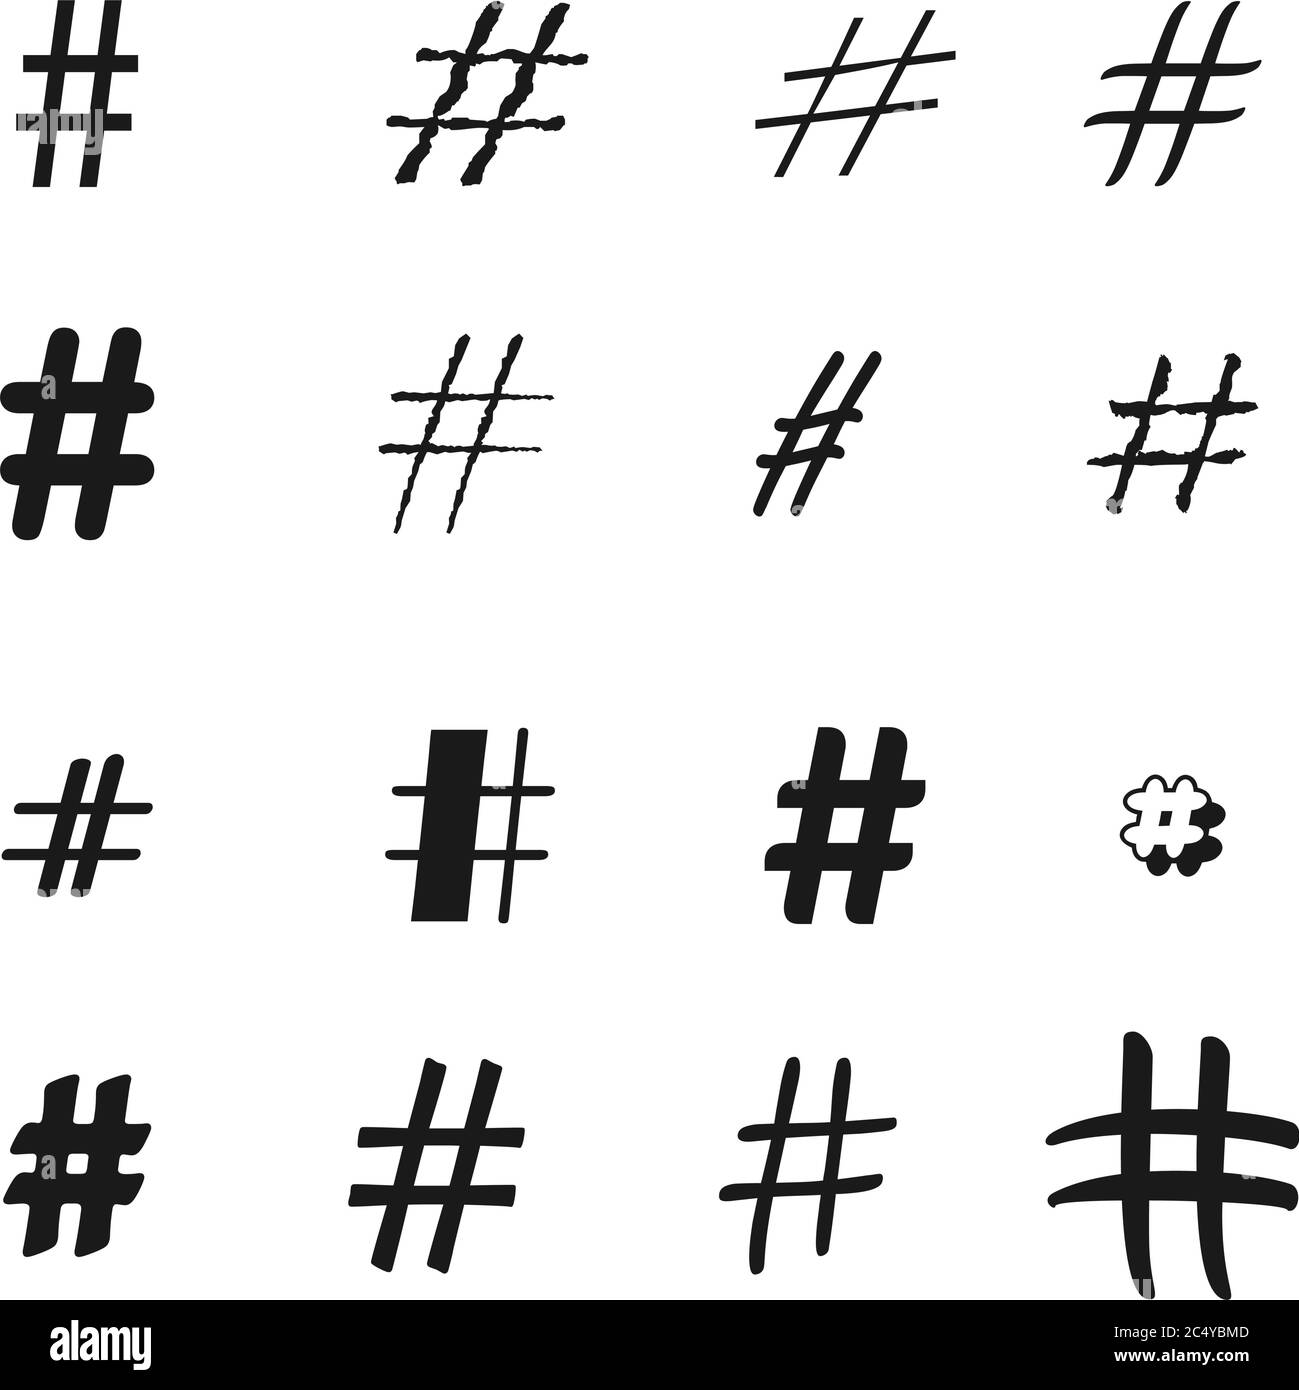 Hashtag signs. Number sign, hash sign. Collection of 16 black symbols isolated on a transparent background Stock Vector